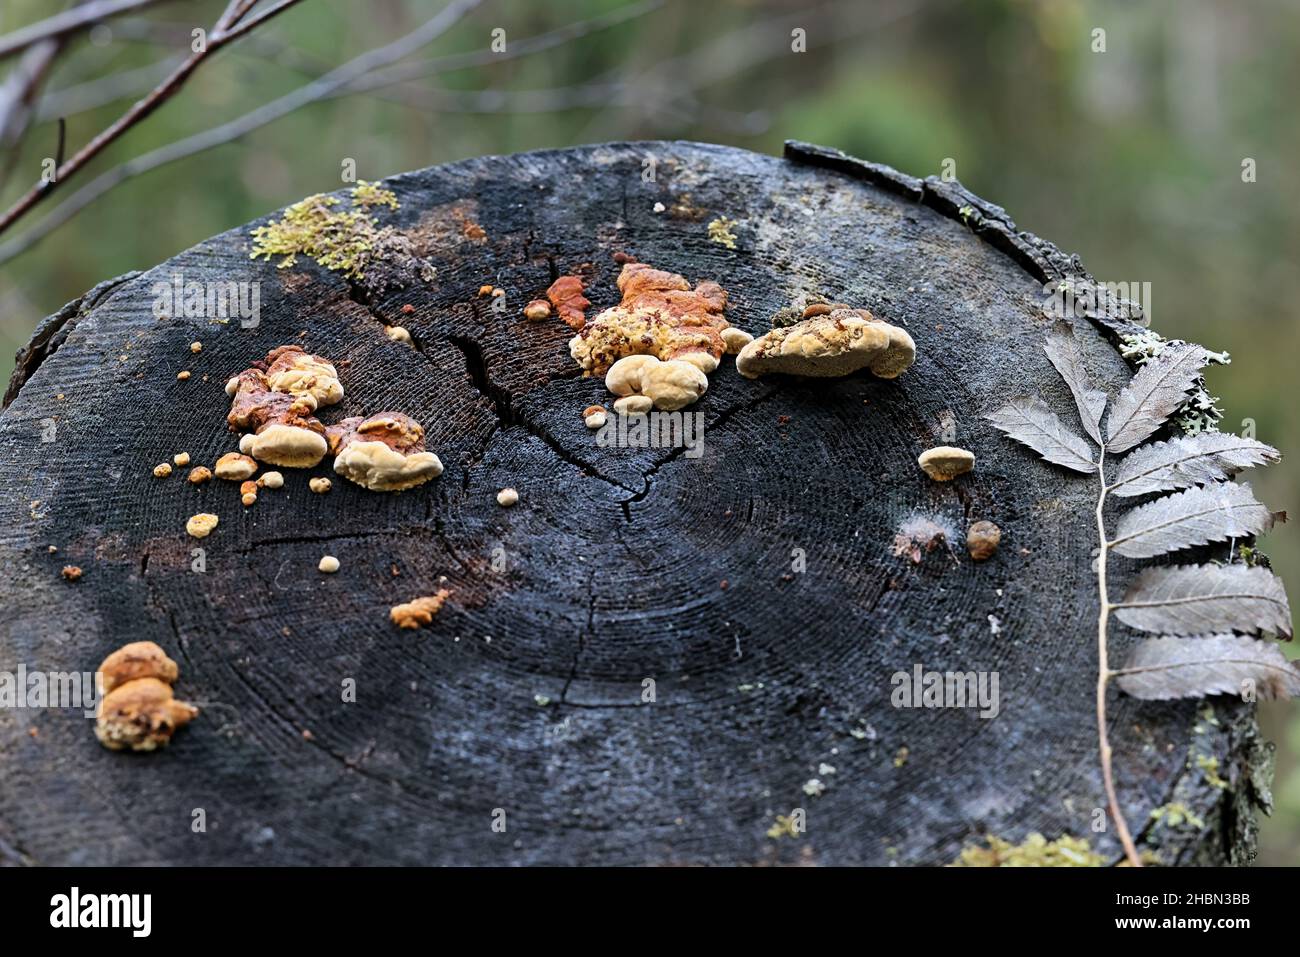 Gloeophyllum odoratum, known as the  Anise Mazegill and Brown Rot Fungus, a polypore from Finland Stock Photo